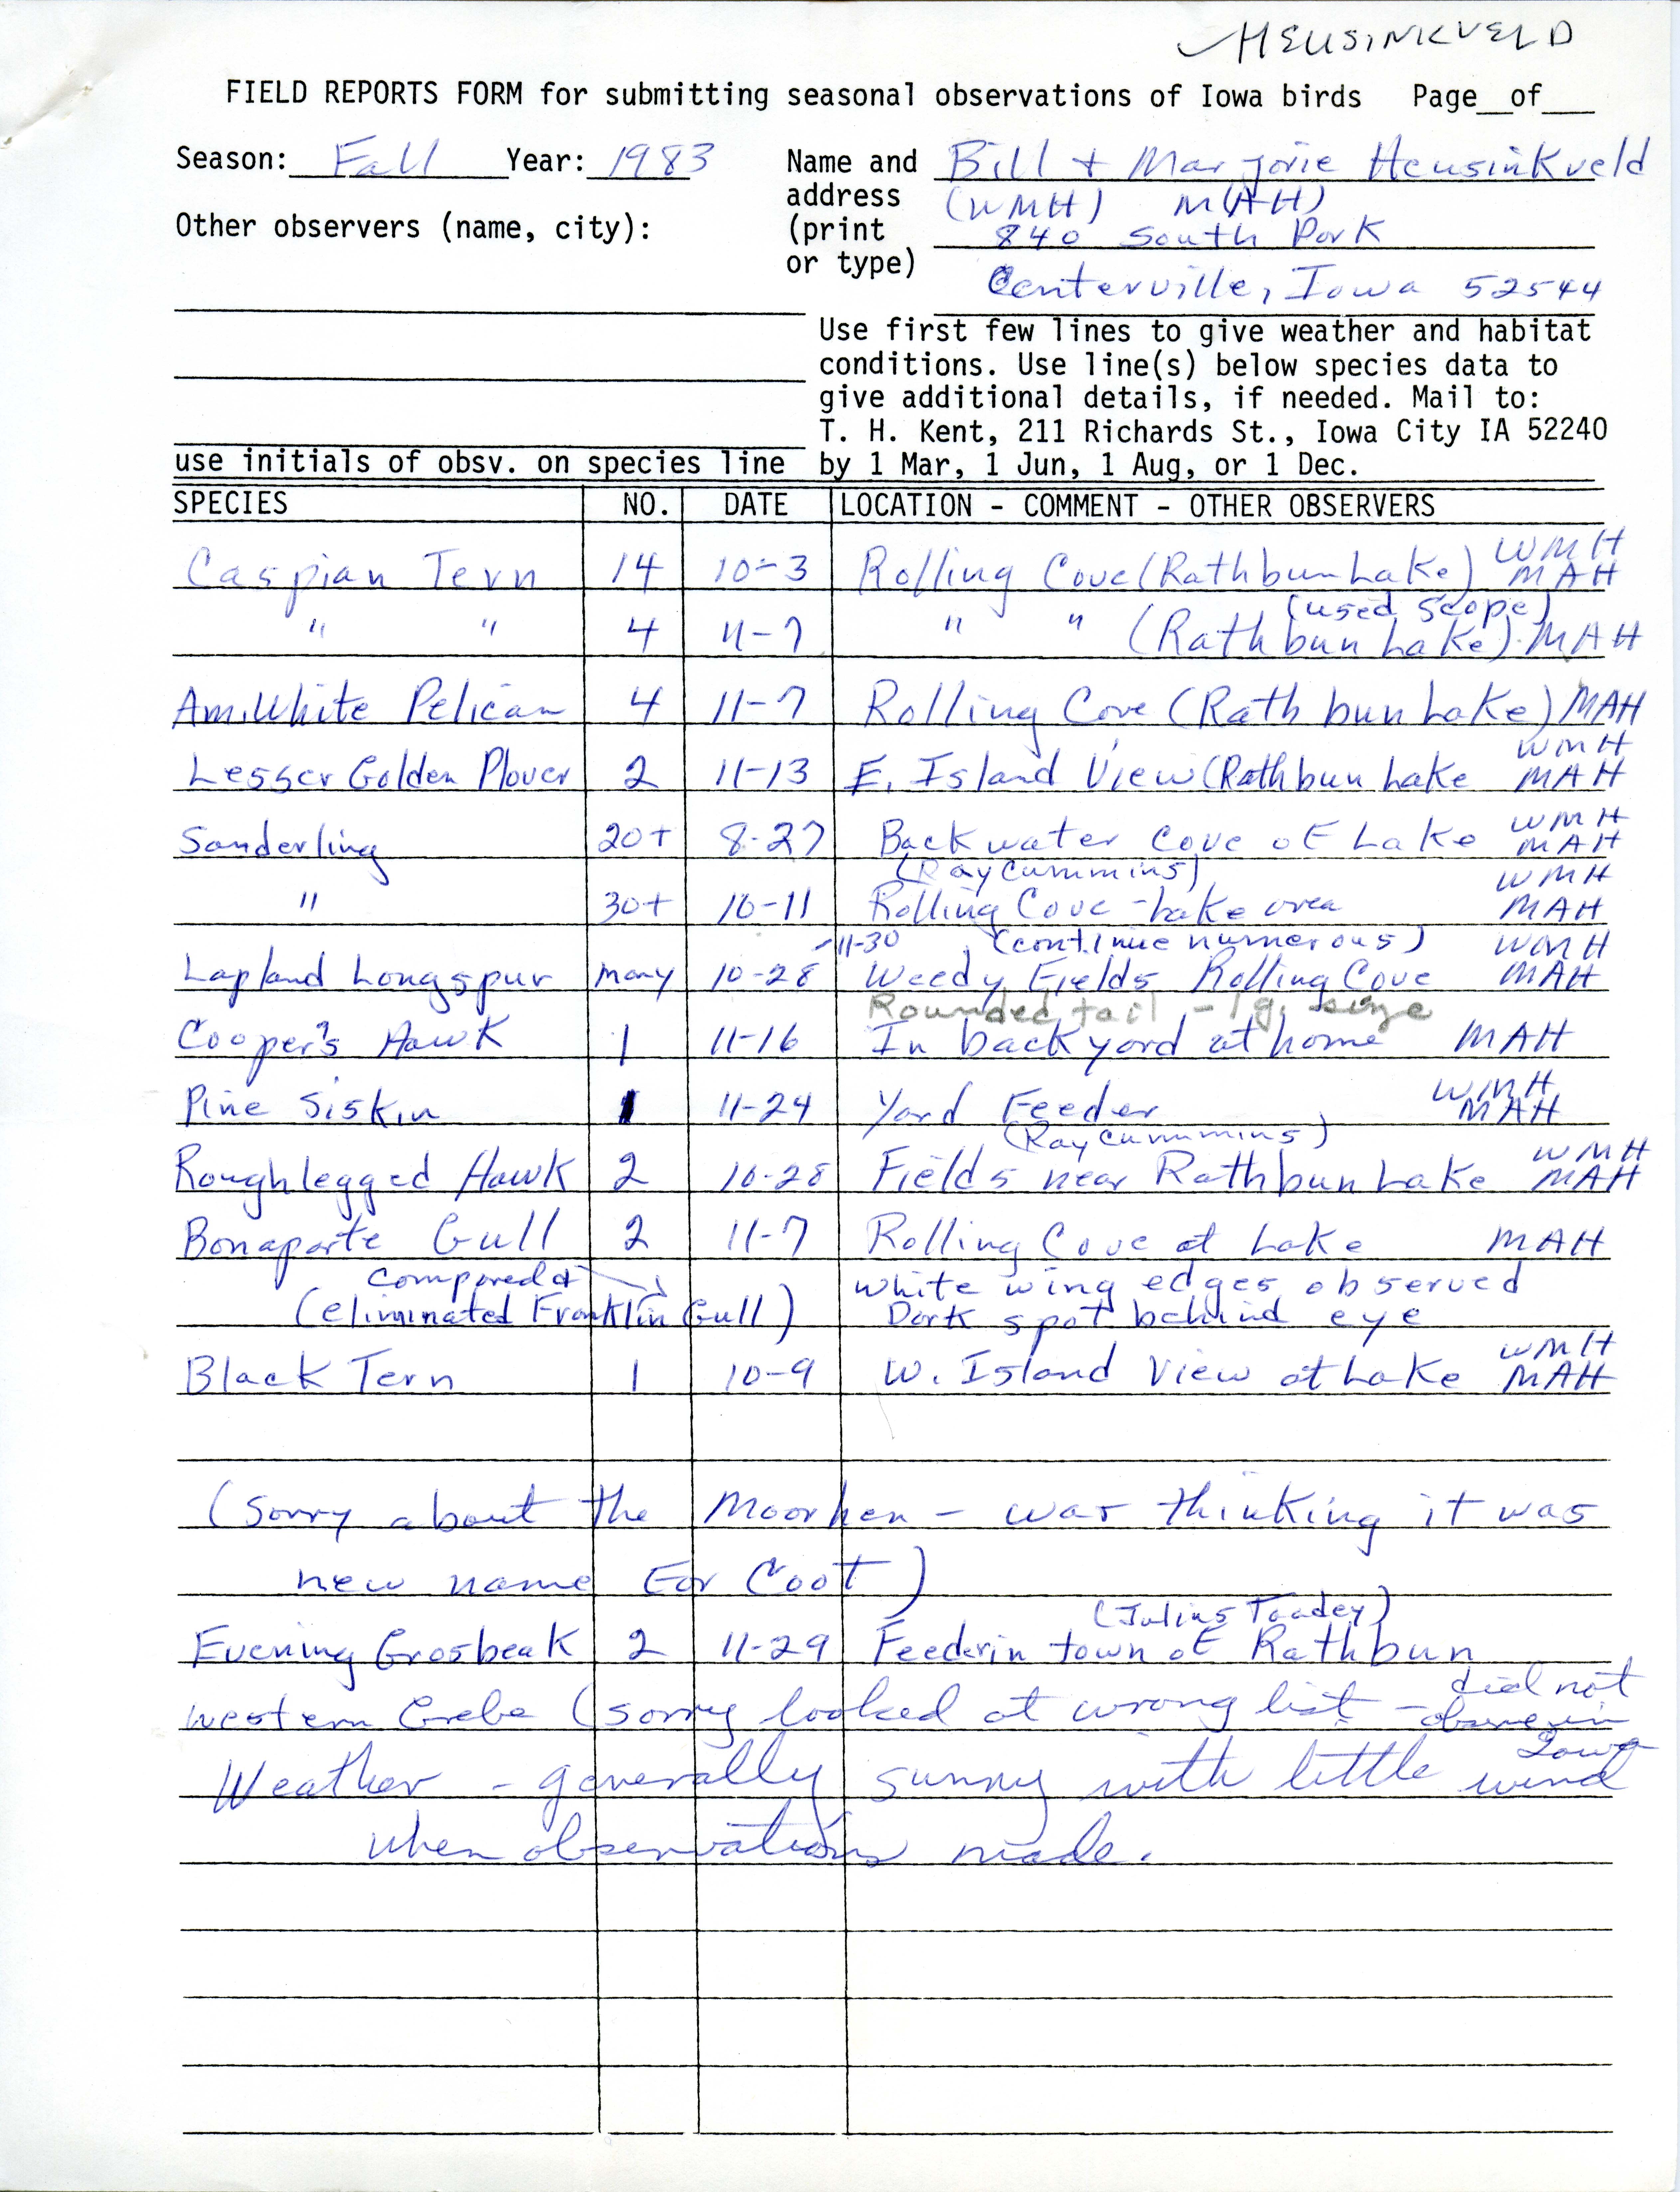 Field reports form for submitting seasonal observations of Iowa birds, Bill and Marjorie Heusinkveld, fall 1983